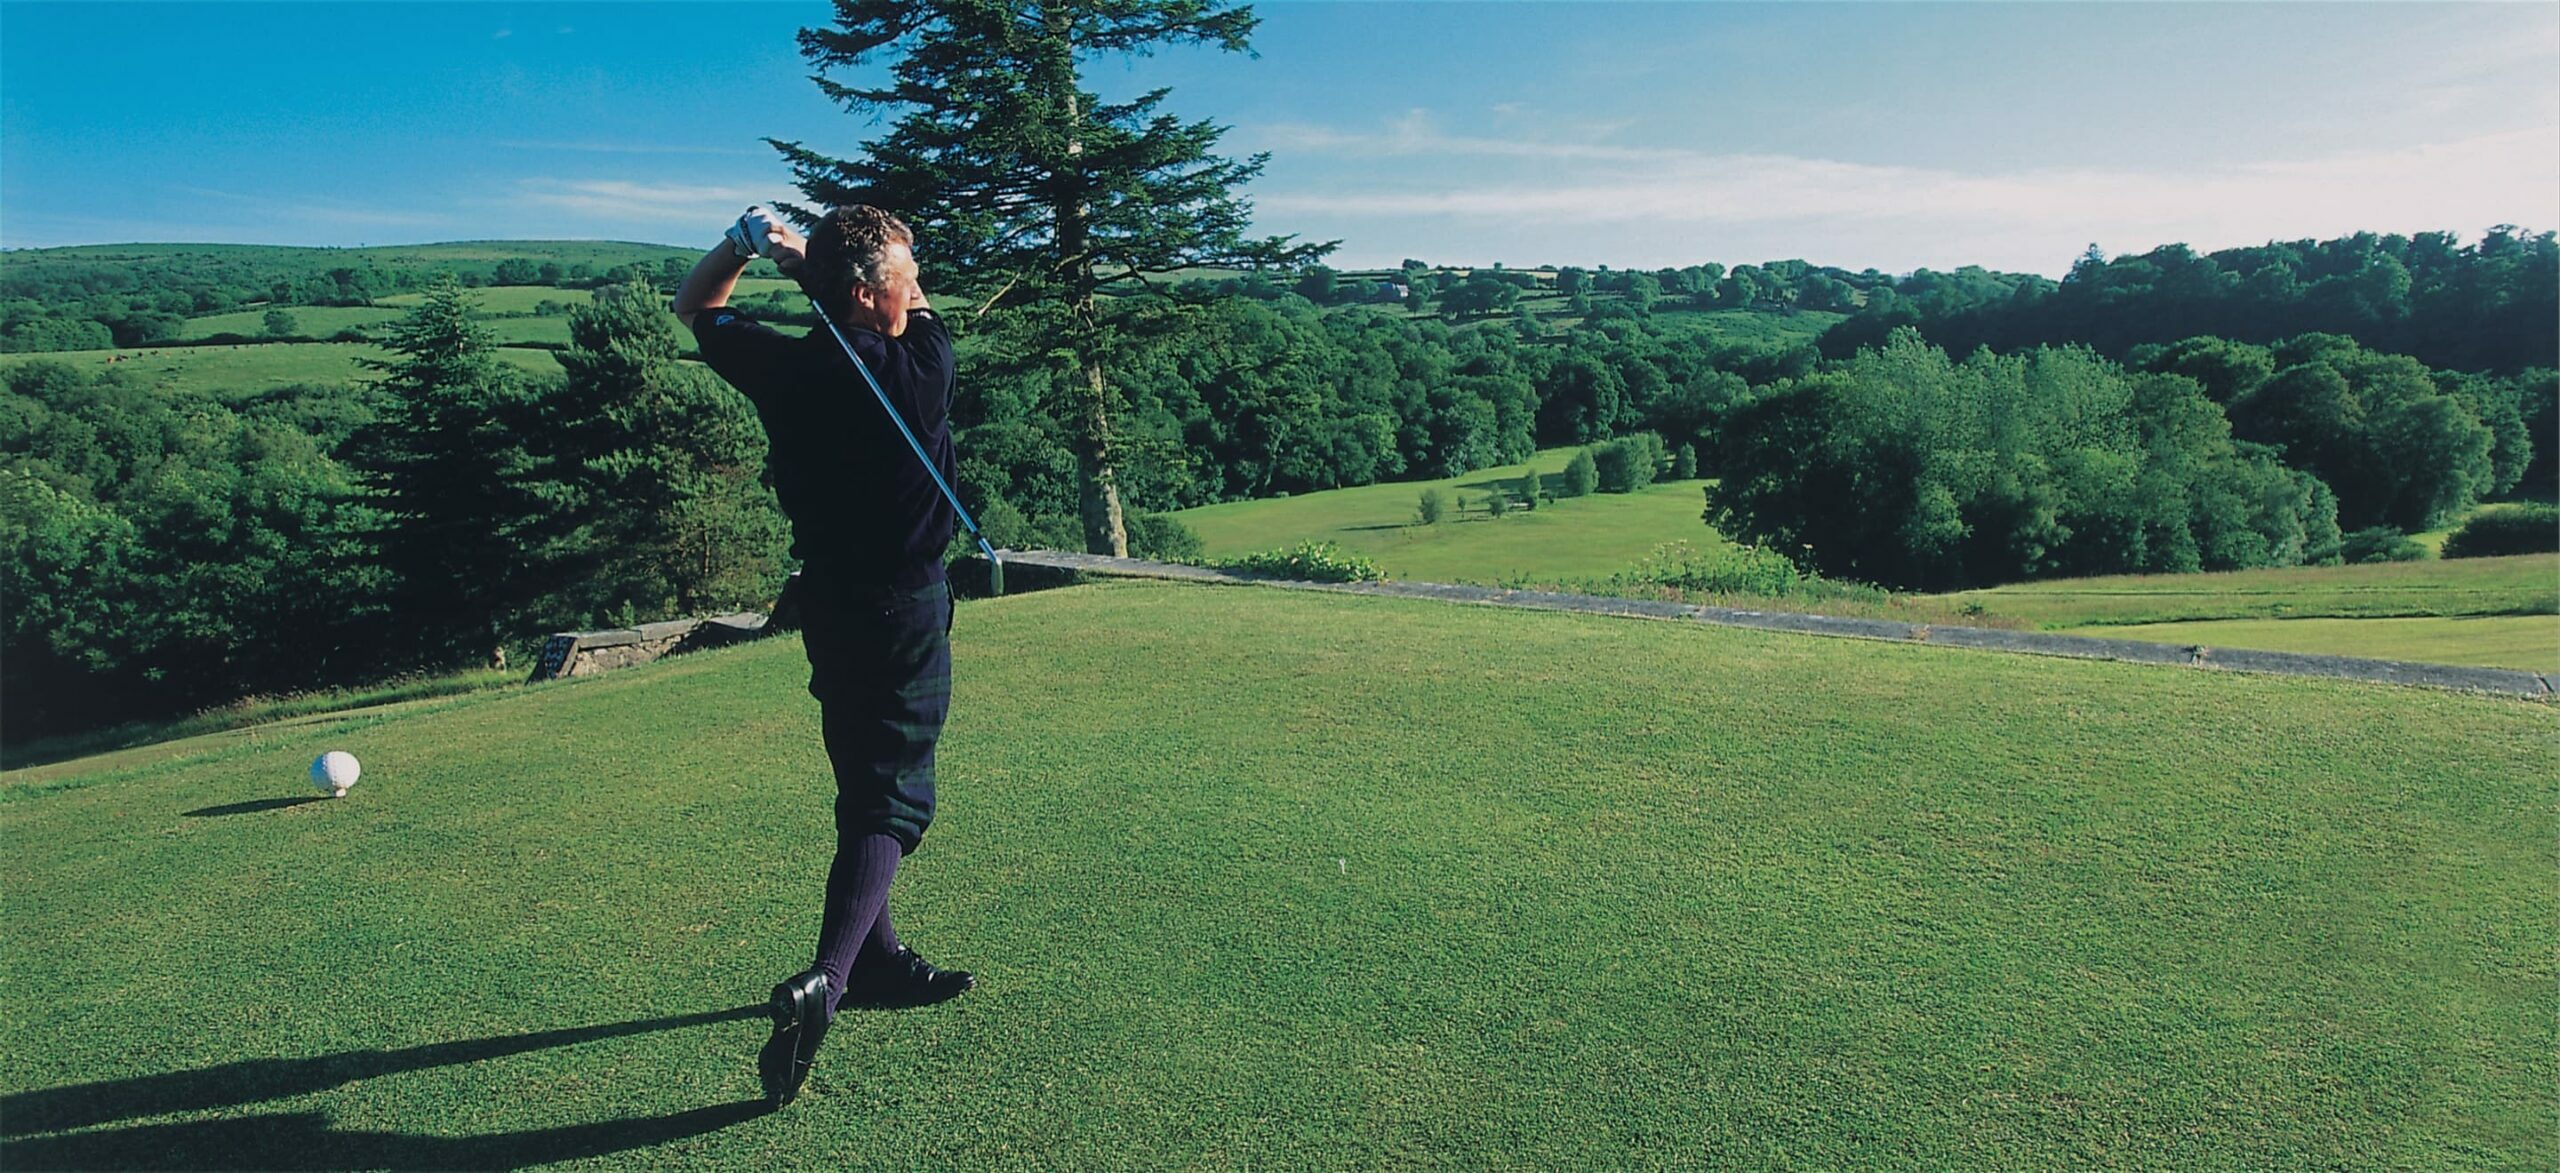 news-meet-the-bovey-castle-pro-golf-players-02-4892568